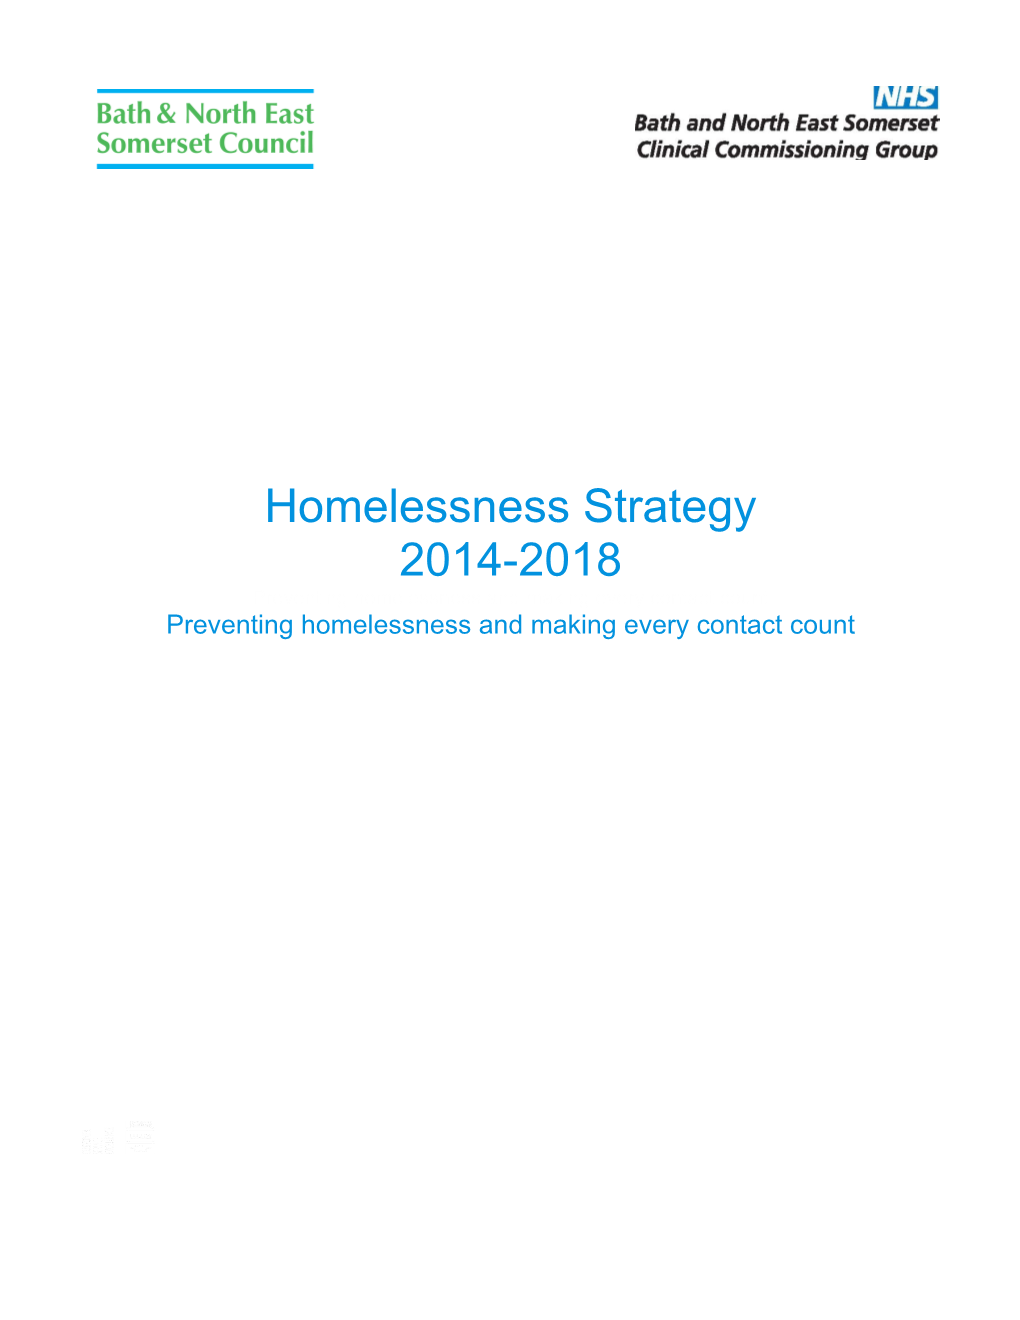 Preventing Homelessness and Making Every Contact Count